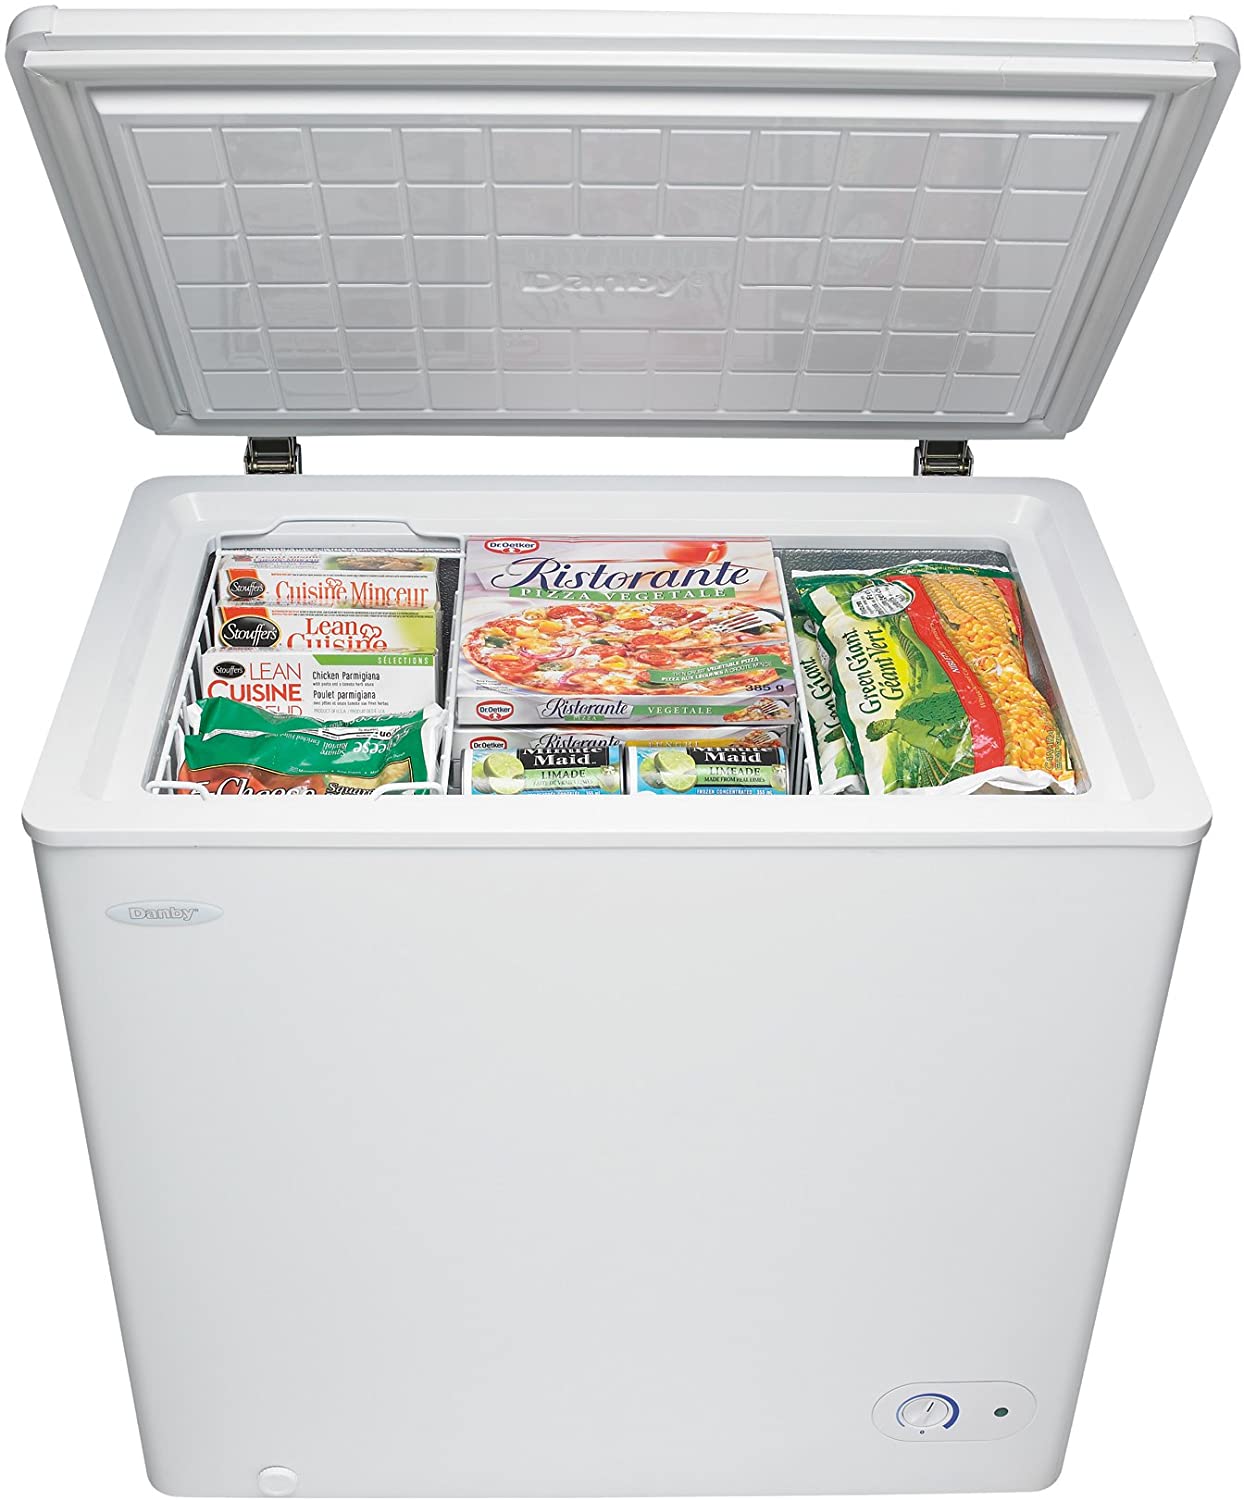 10 BEST 5 Cu Ft CHEST FREEZER: SMALL DEEP FREEZER 2022 REVIEW All In One Cooling Gear Lab: Any Refrigerators Air Conditioners Freezers Ice Makers Coolers Fans Reviewed And Compared.